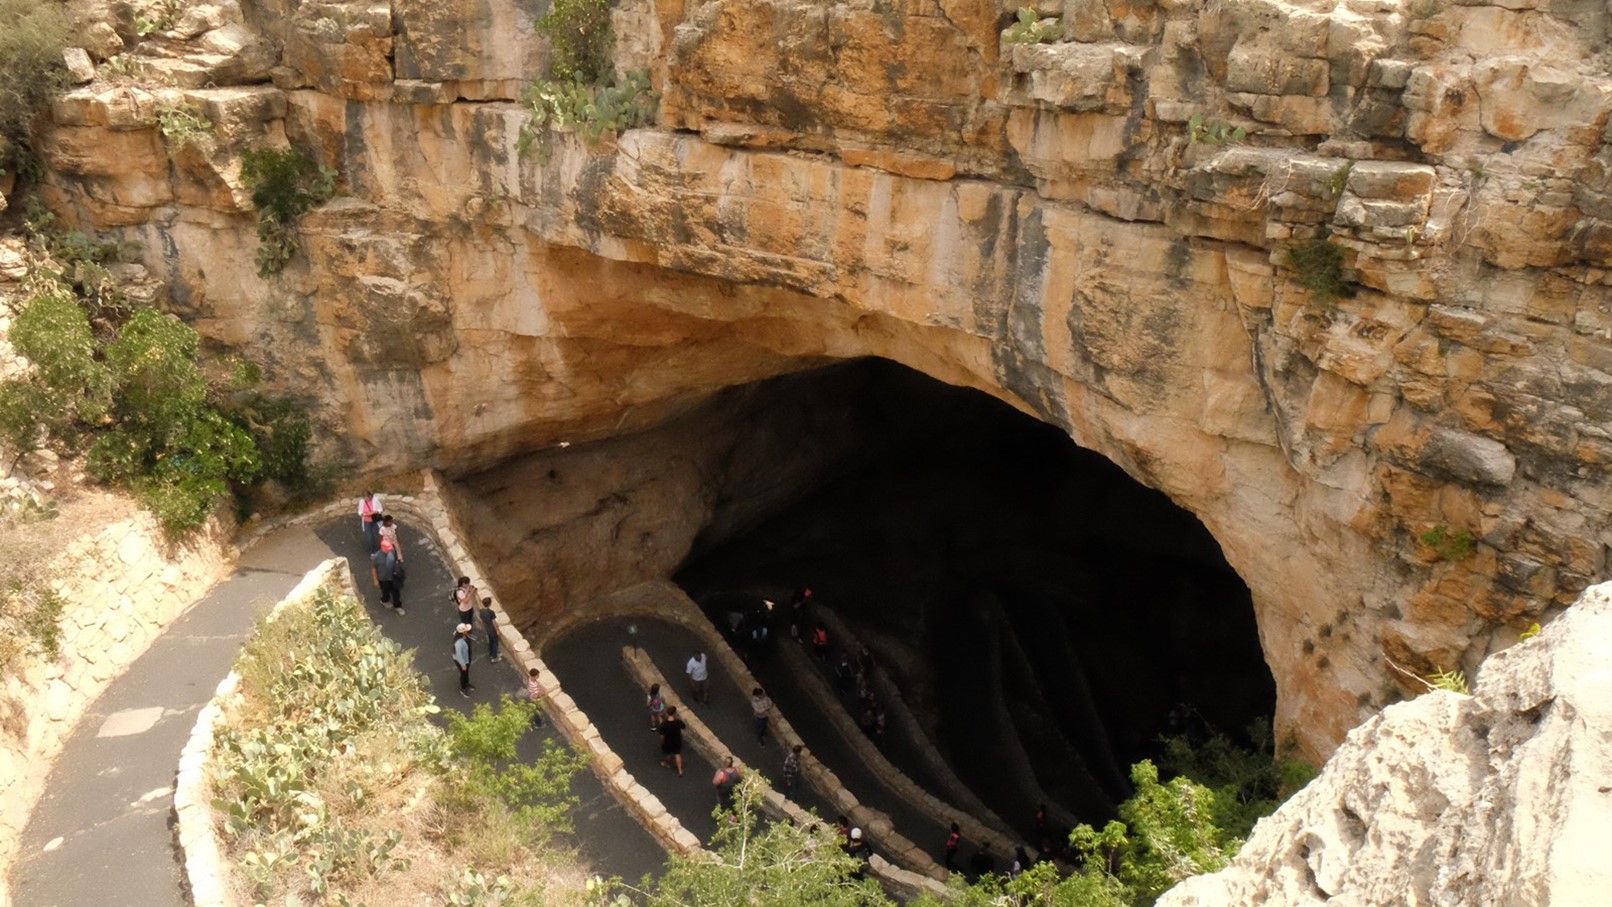 The natural entrance into Carlsbad Cave